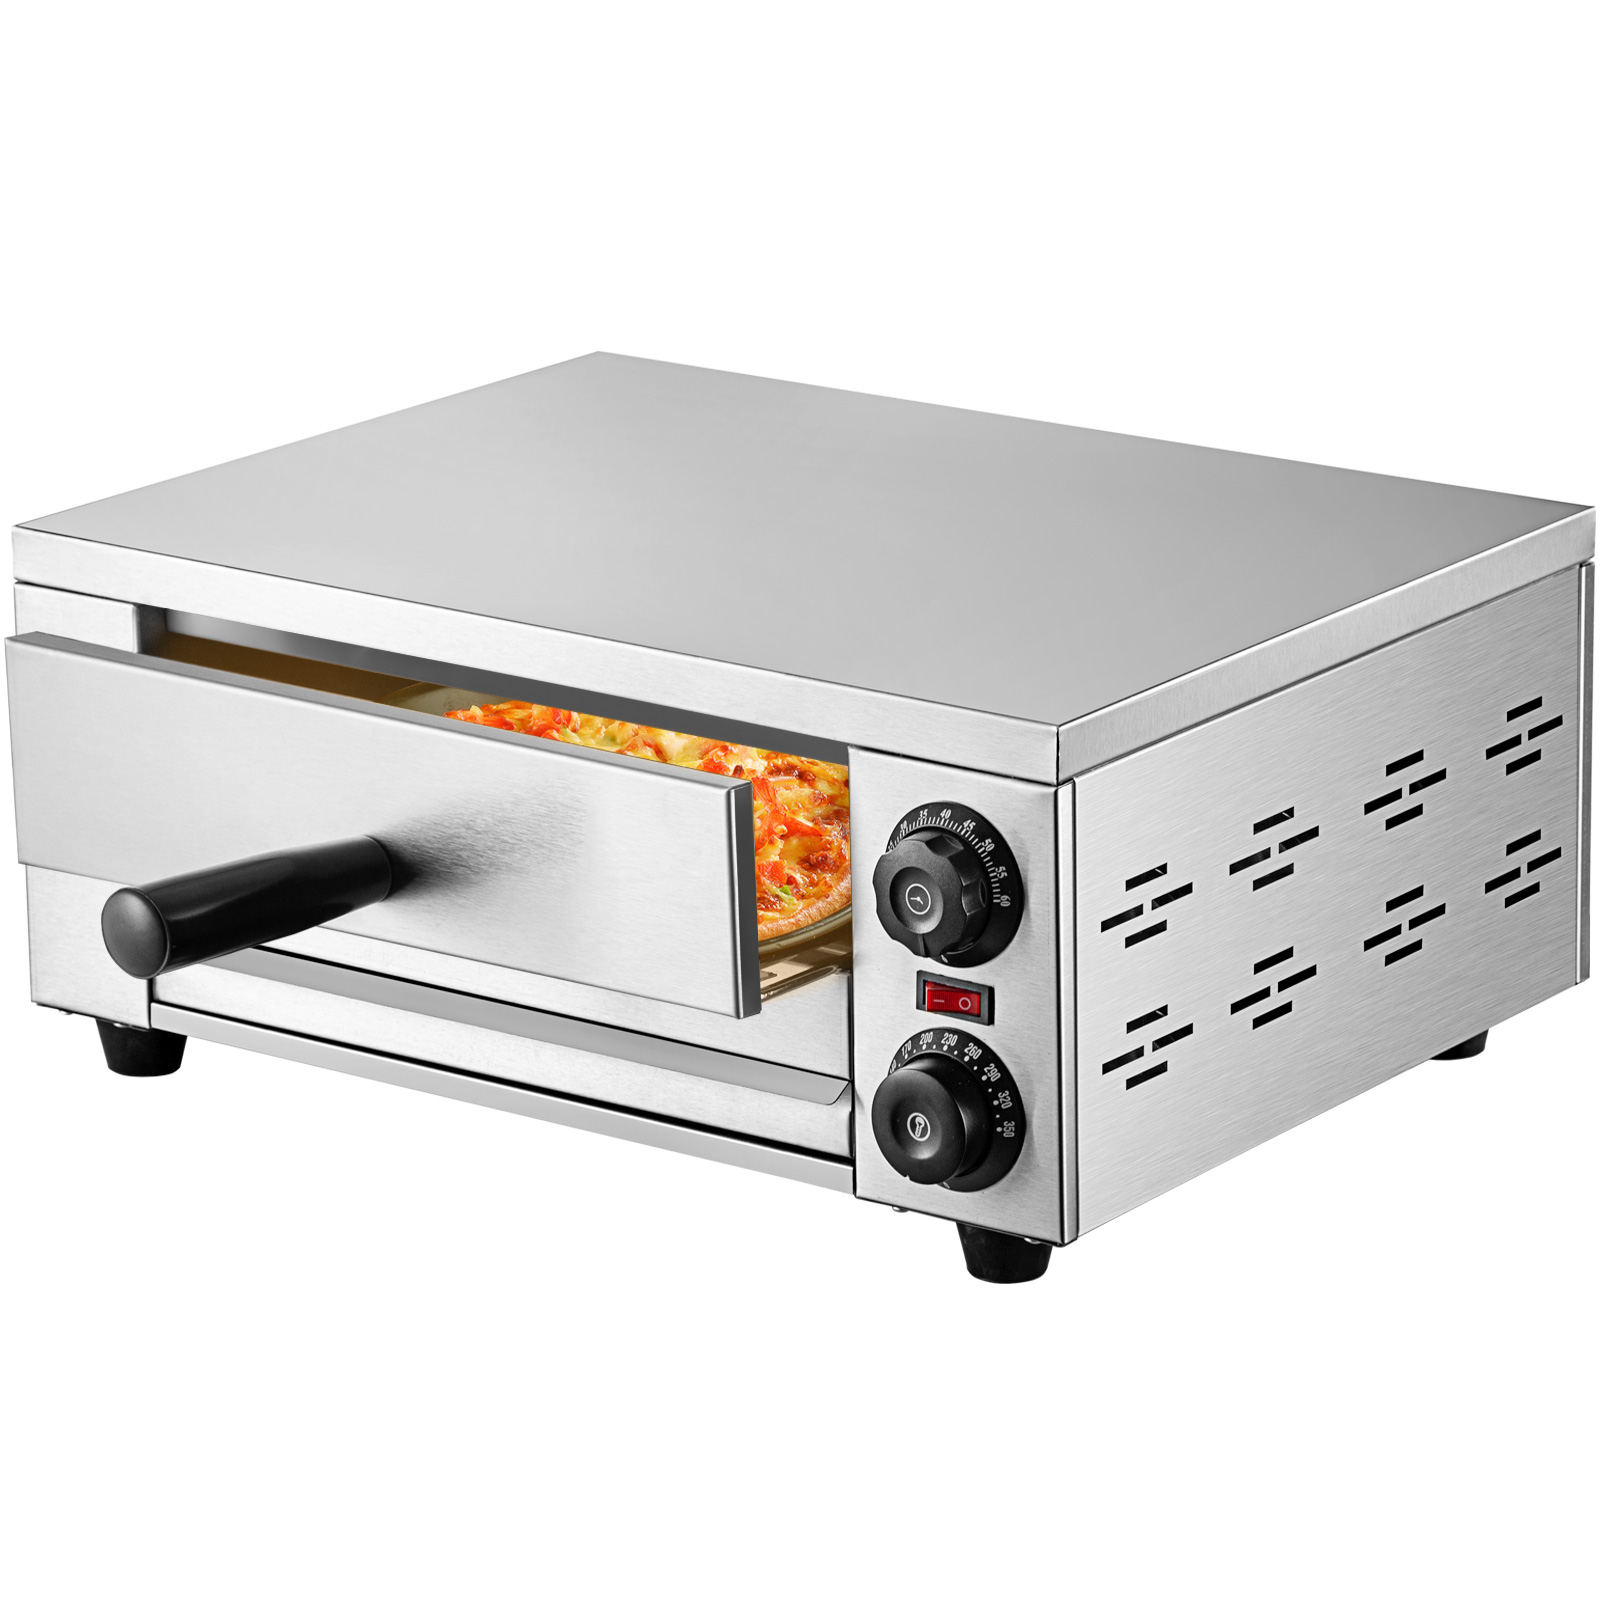 Vevor Electric Pizza Oven Countertop Pizza Oven 12"pizza Baker Stainless Steel от Vevor Many GEOs